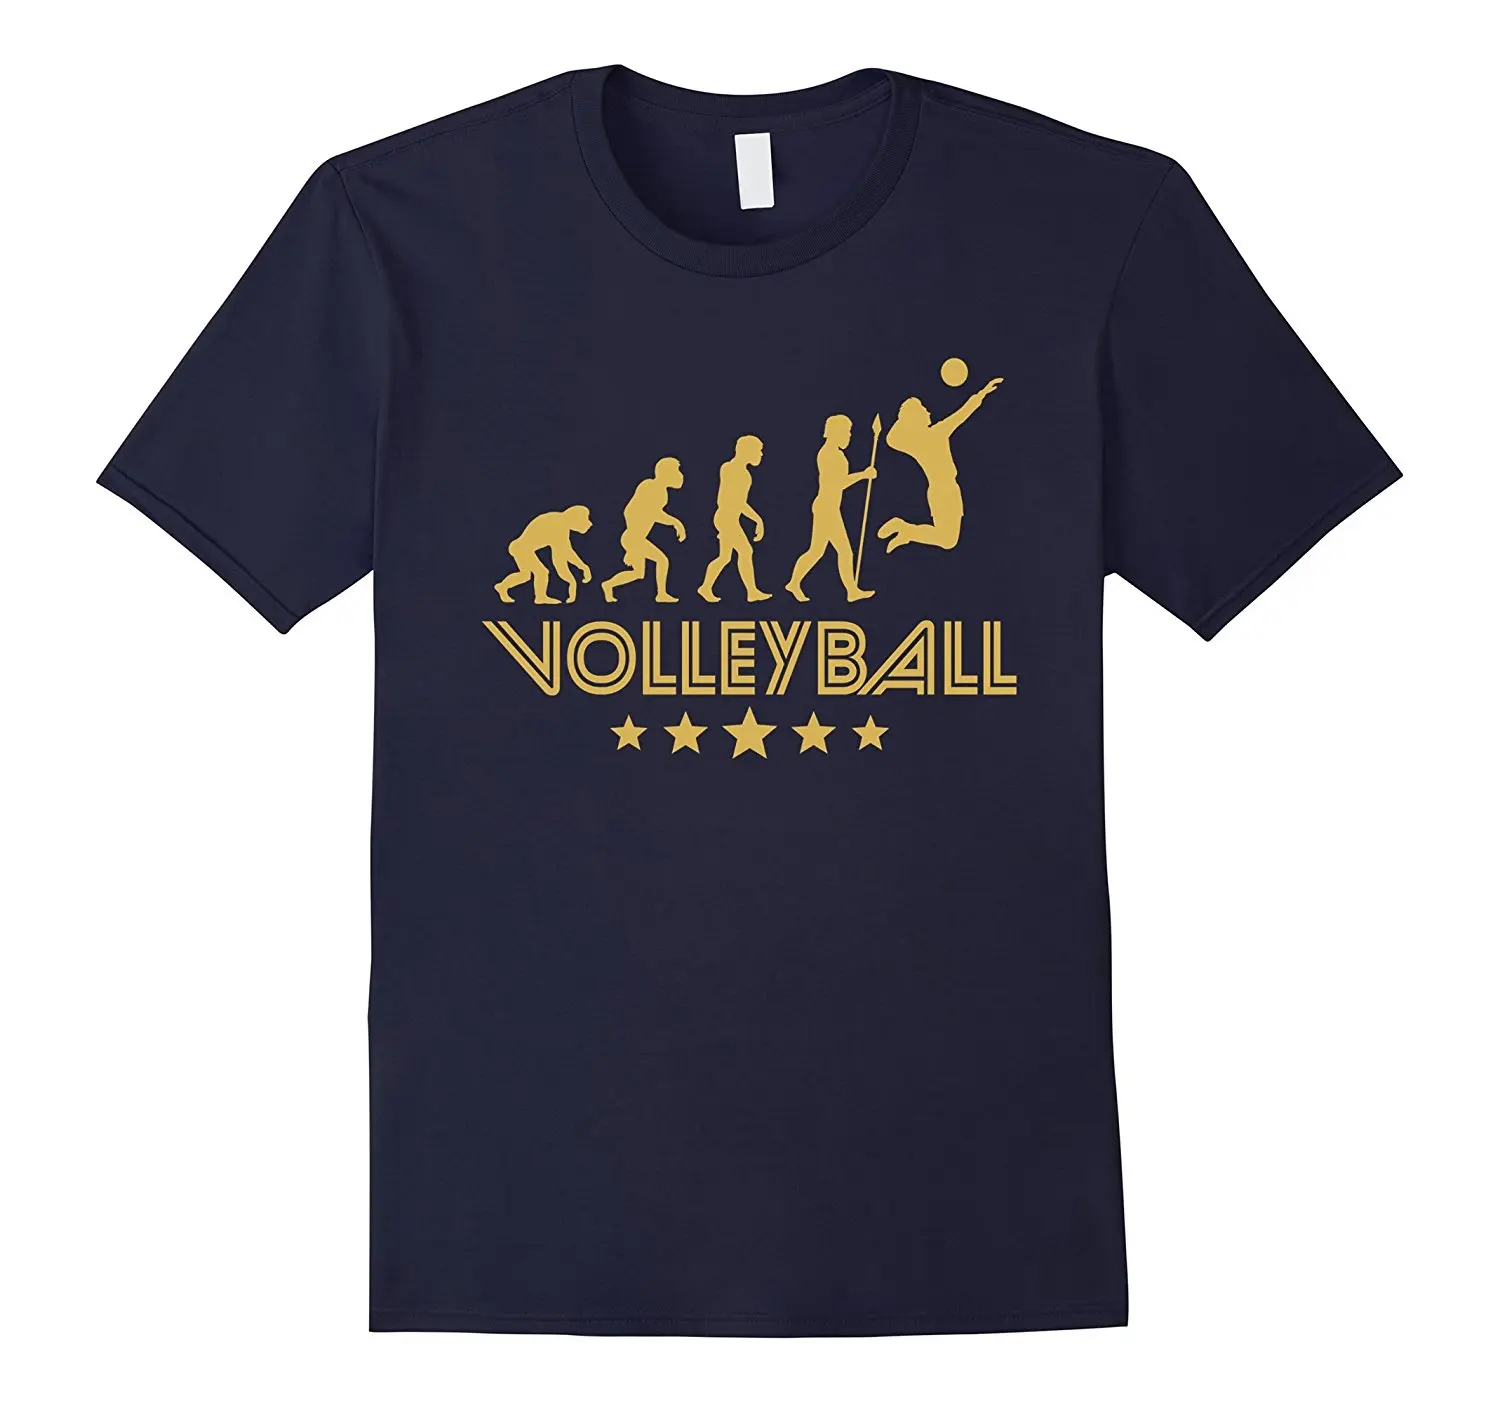 

Volleyballs Evolution Retro Style Graphic T-Shirt Mens 100% Cotton Plus Size Top Tee Tee Shirt Casual Short Sleeve Tops